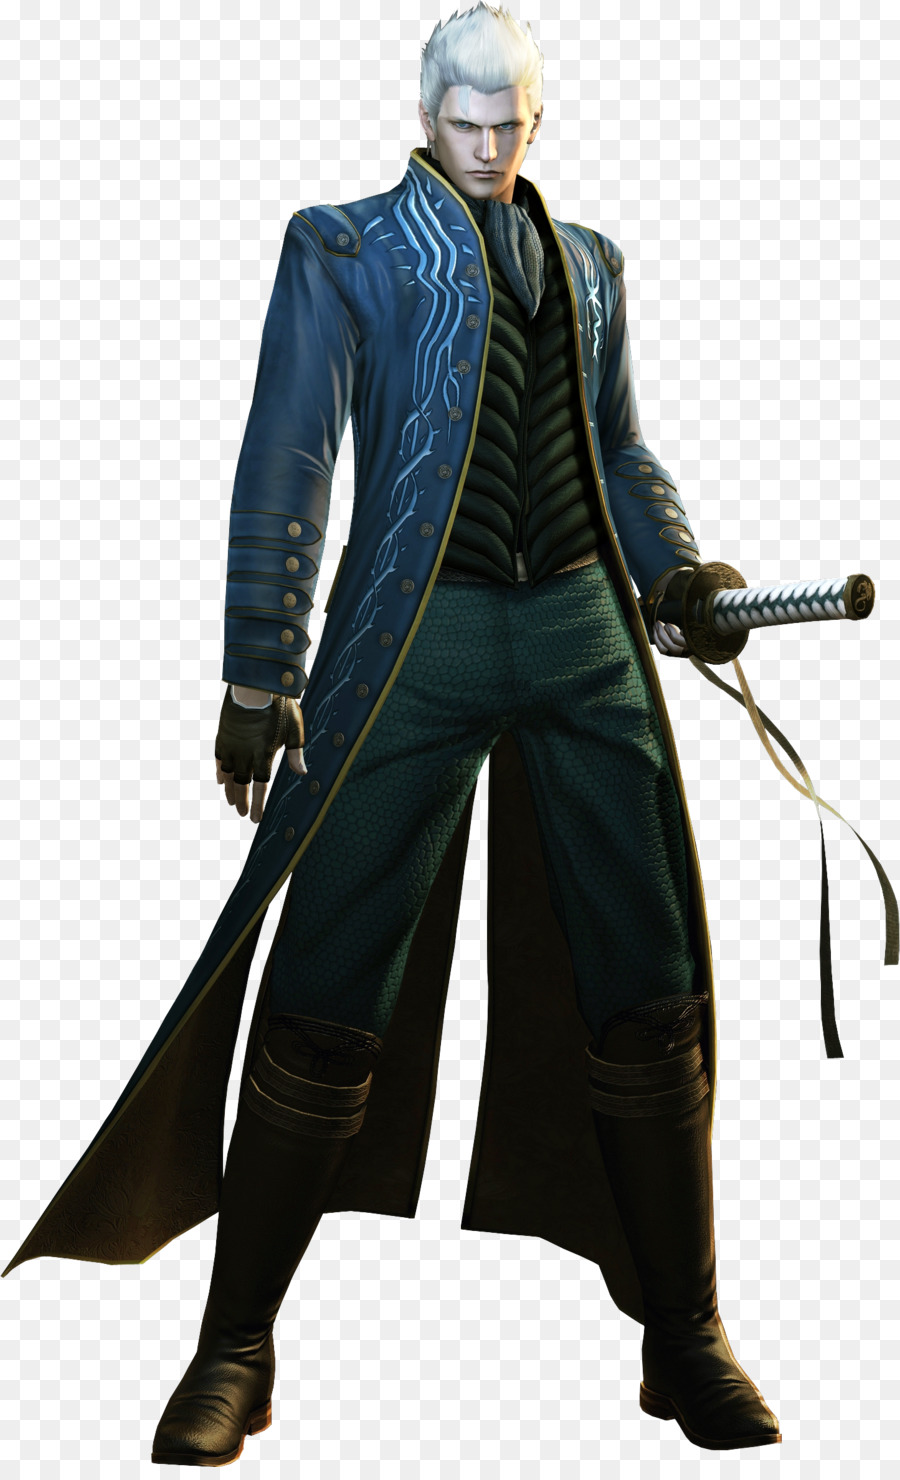 Devil May Cry 4 Devil May Cry 3: Dantes Erwachen DmC: Devil May Cry Devil May Cry, Bayonetta 2 - Devil May Cry PNG Foto